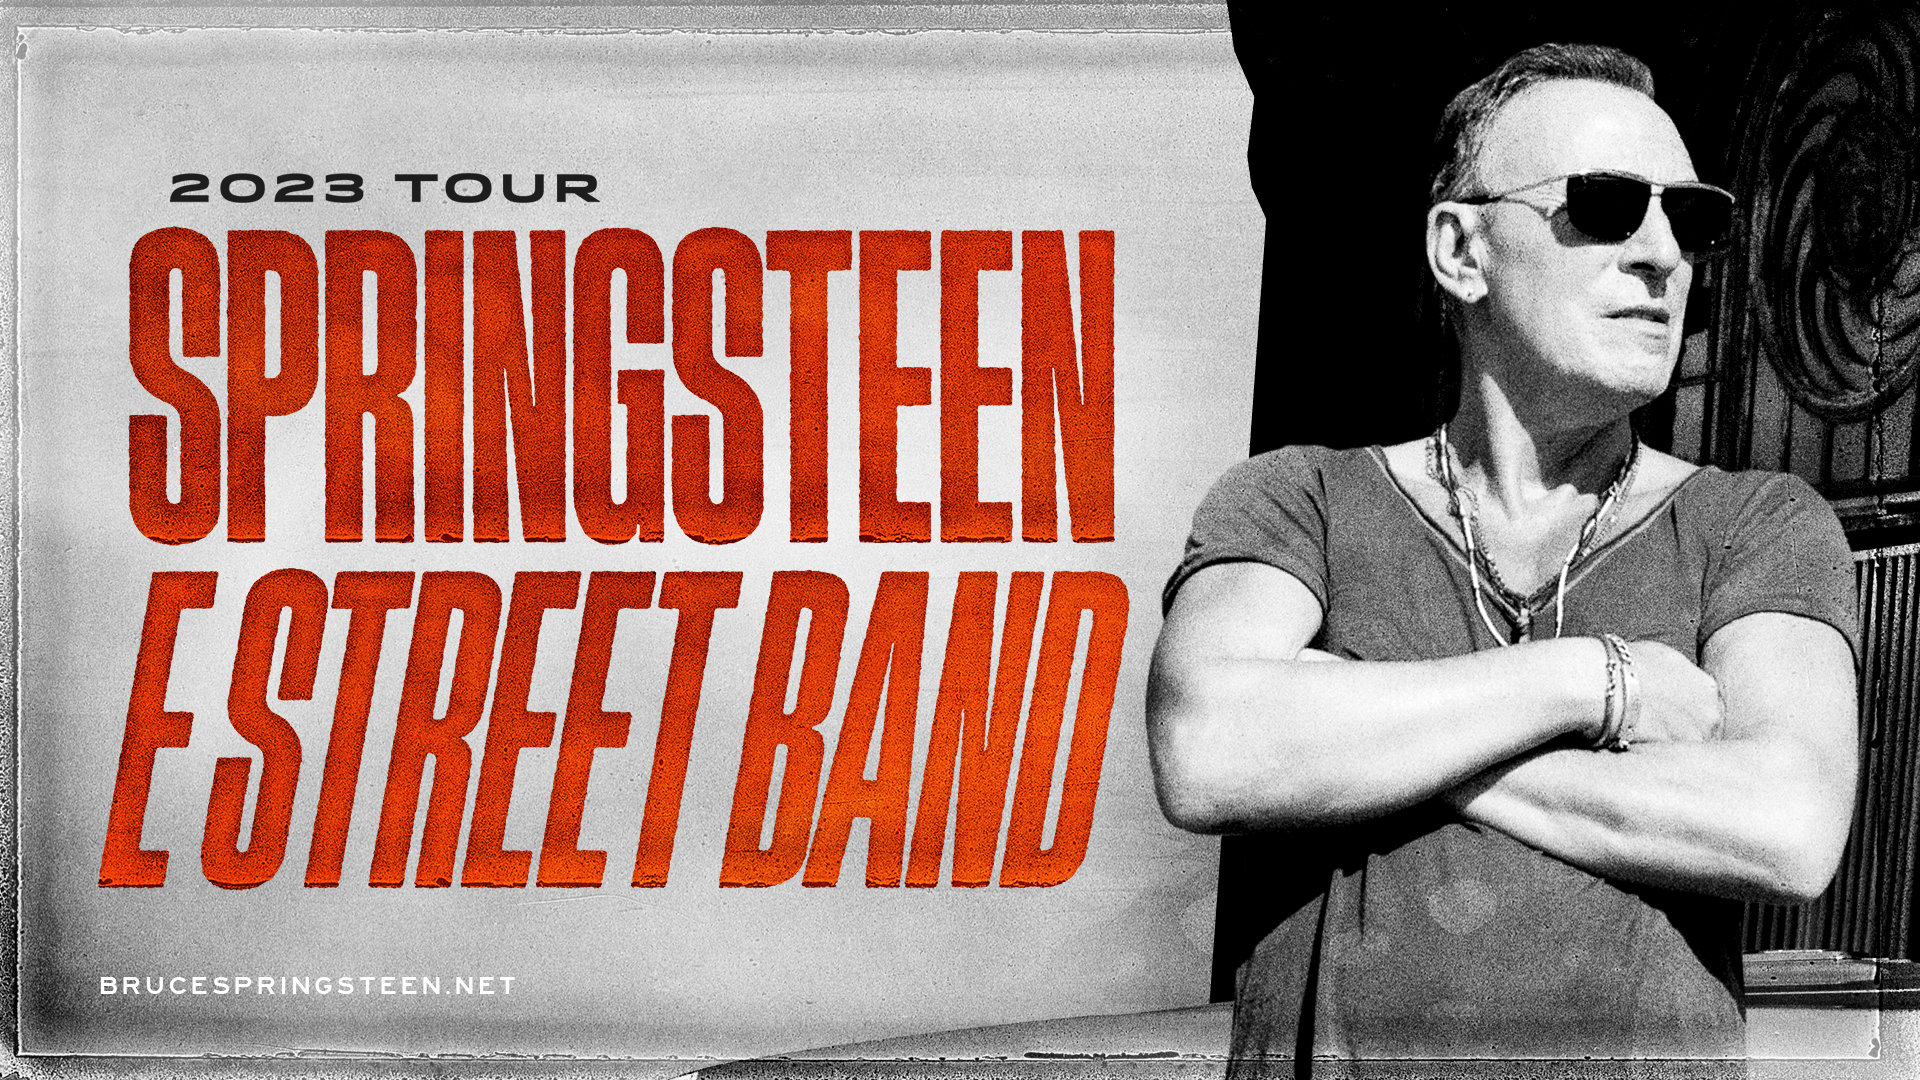 Bruce Springsteen and the E Street Band - 2023 Tour- 